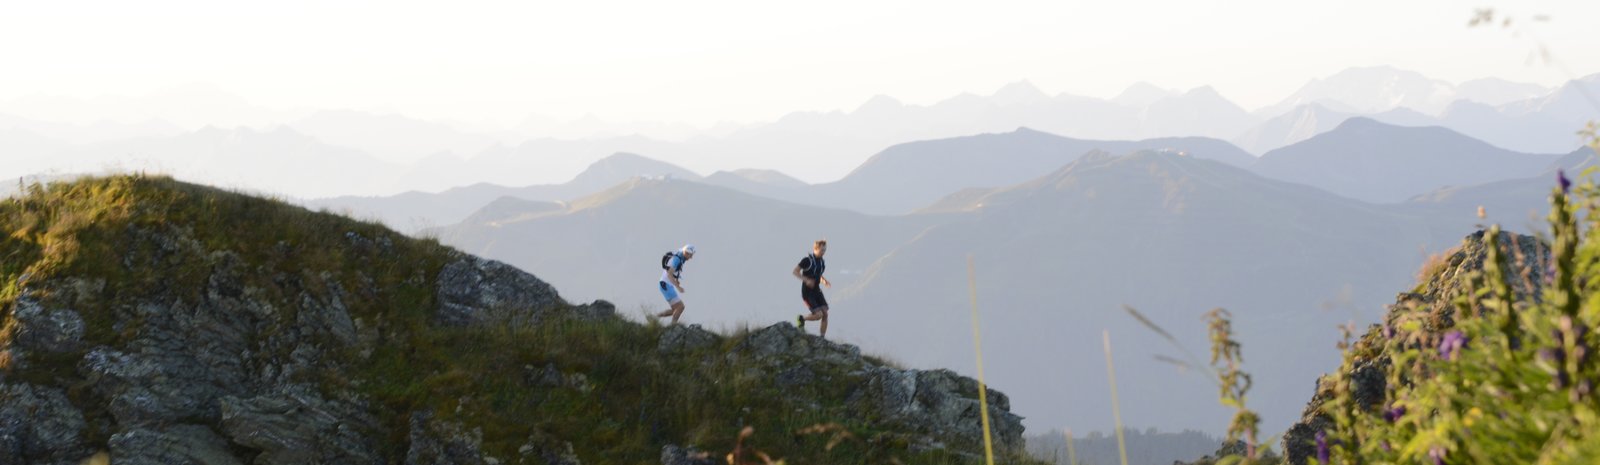 Trailrunning on the mountains | © Sibylle Feichtinger